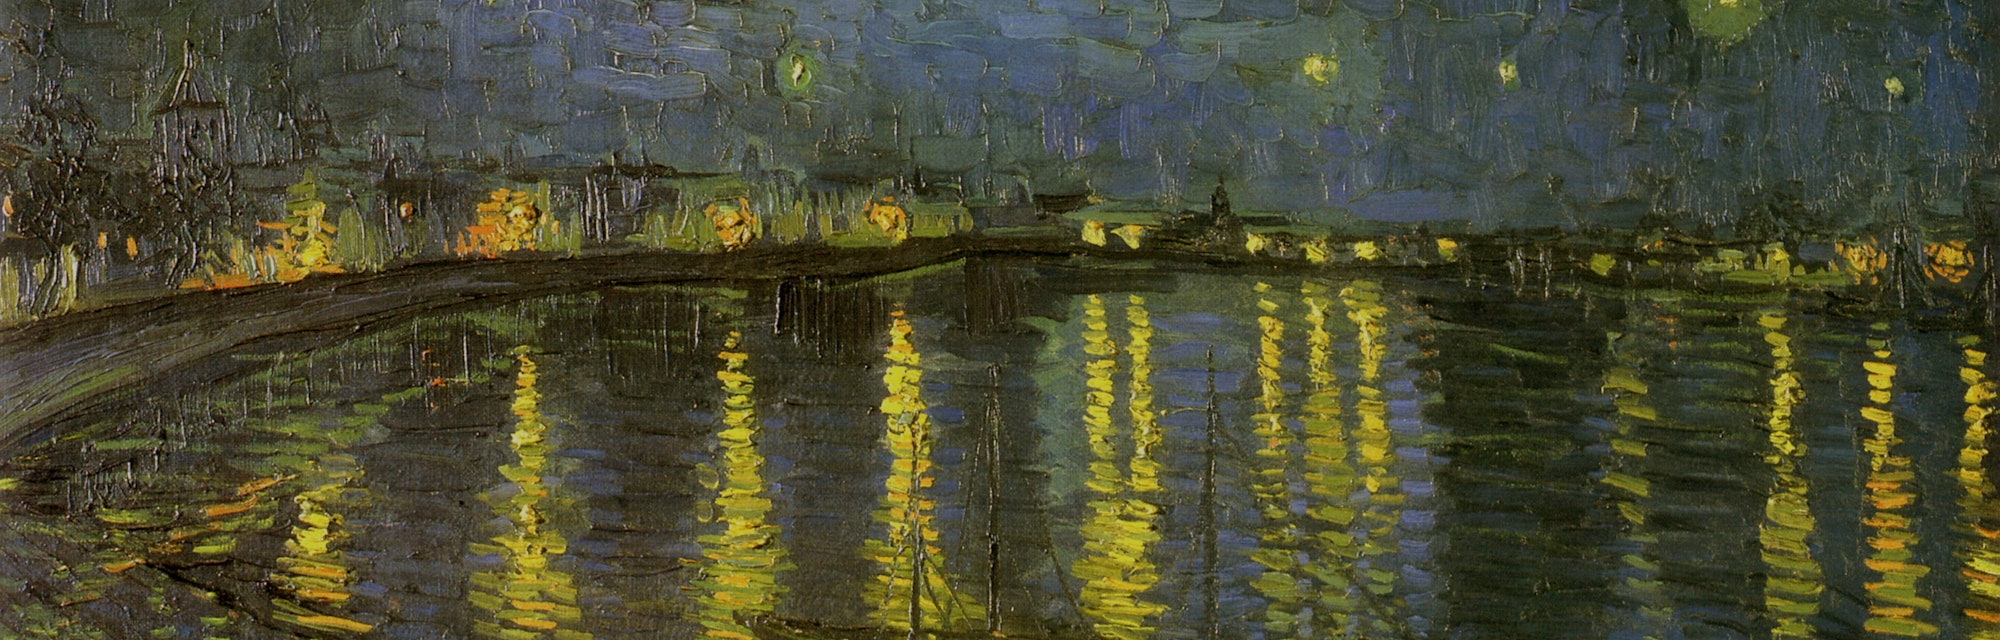 Starry Night on Rhone, Van Gogh, Vincent Willem, 1888 . (Photo by: Picturenow/Universal Images Group...